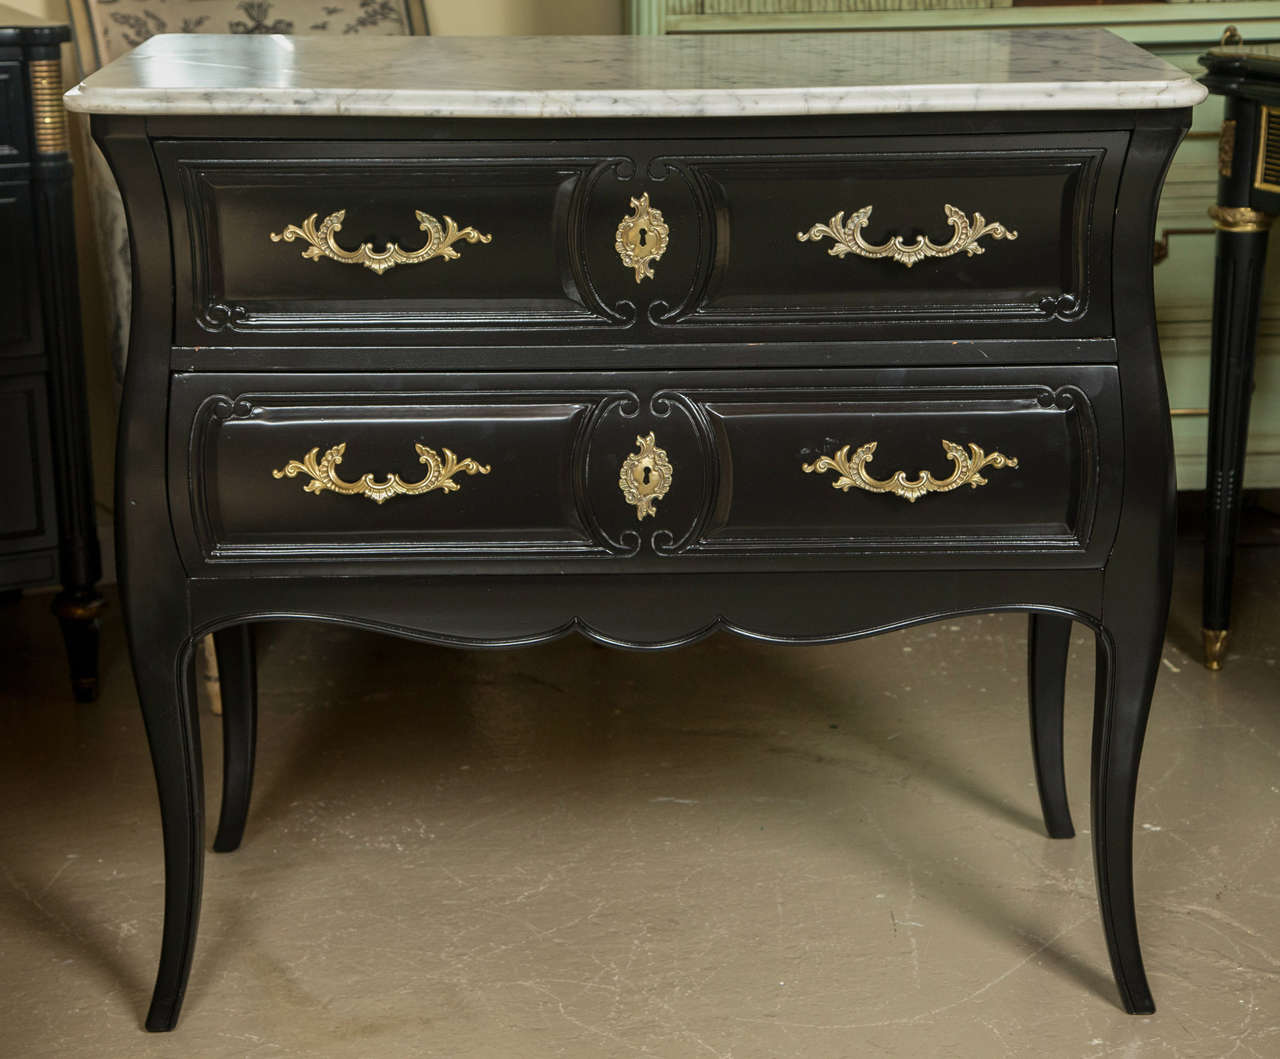 A fine ebonized and marble-top pair of commodes or nightstands by Maison Jansen. This rare and fine pair of double drawer bombe marble top commodes each having a Louis XV style leg supporting an upper case of bombe form. The whole leading to a white